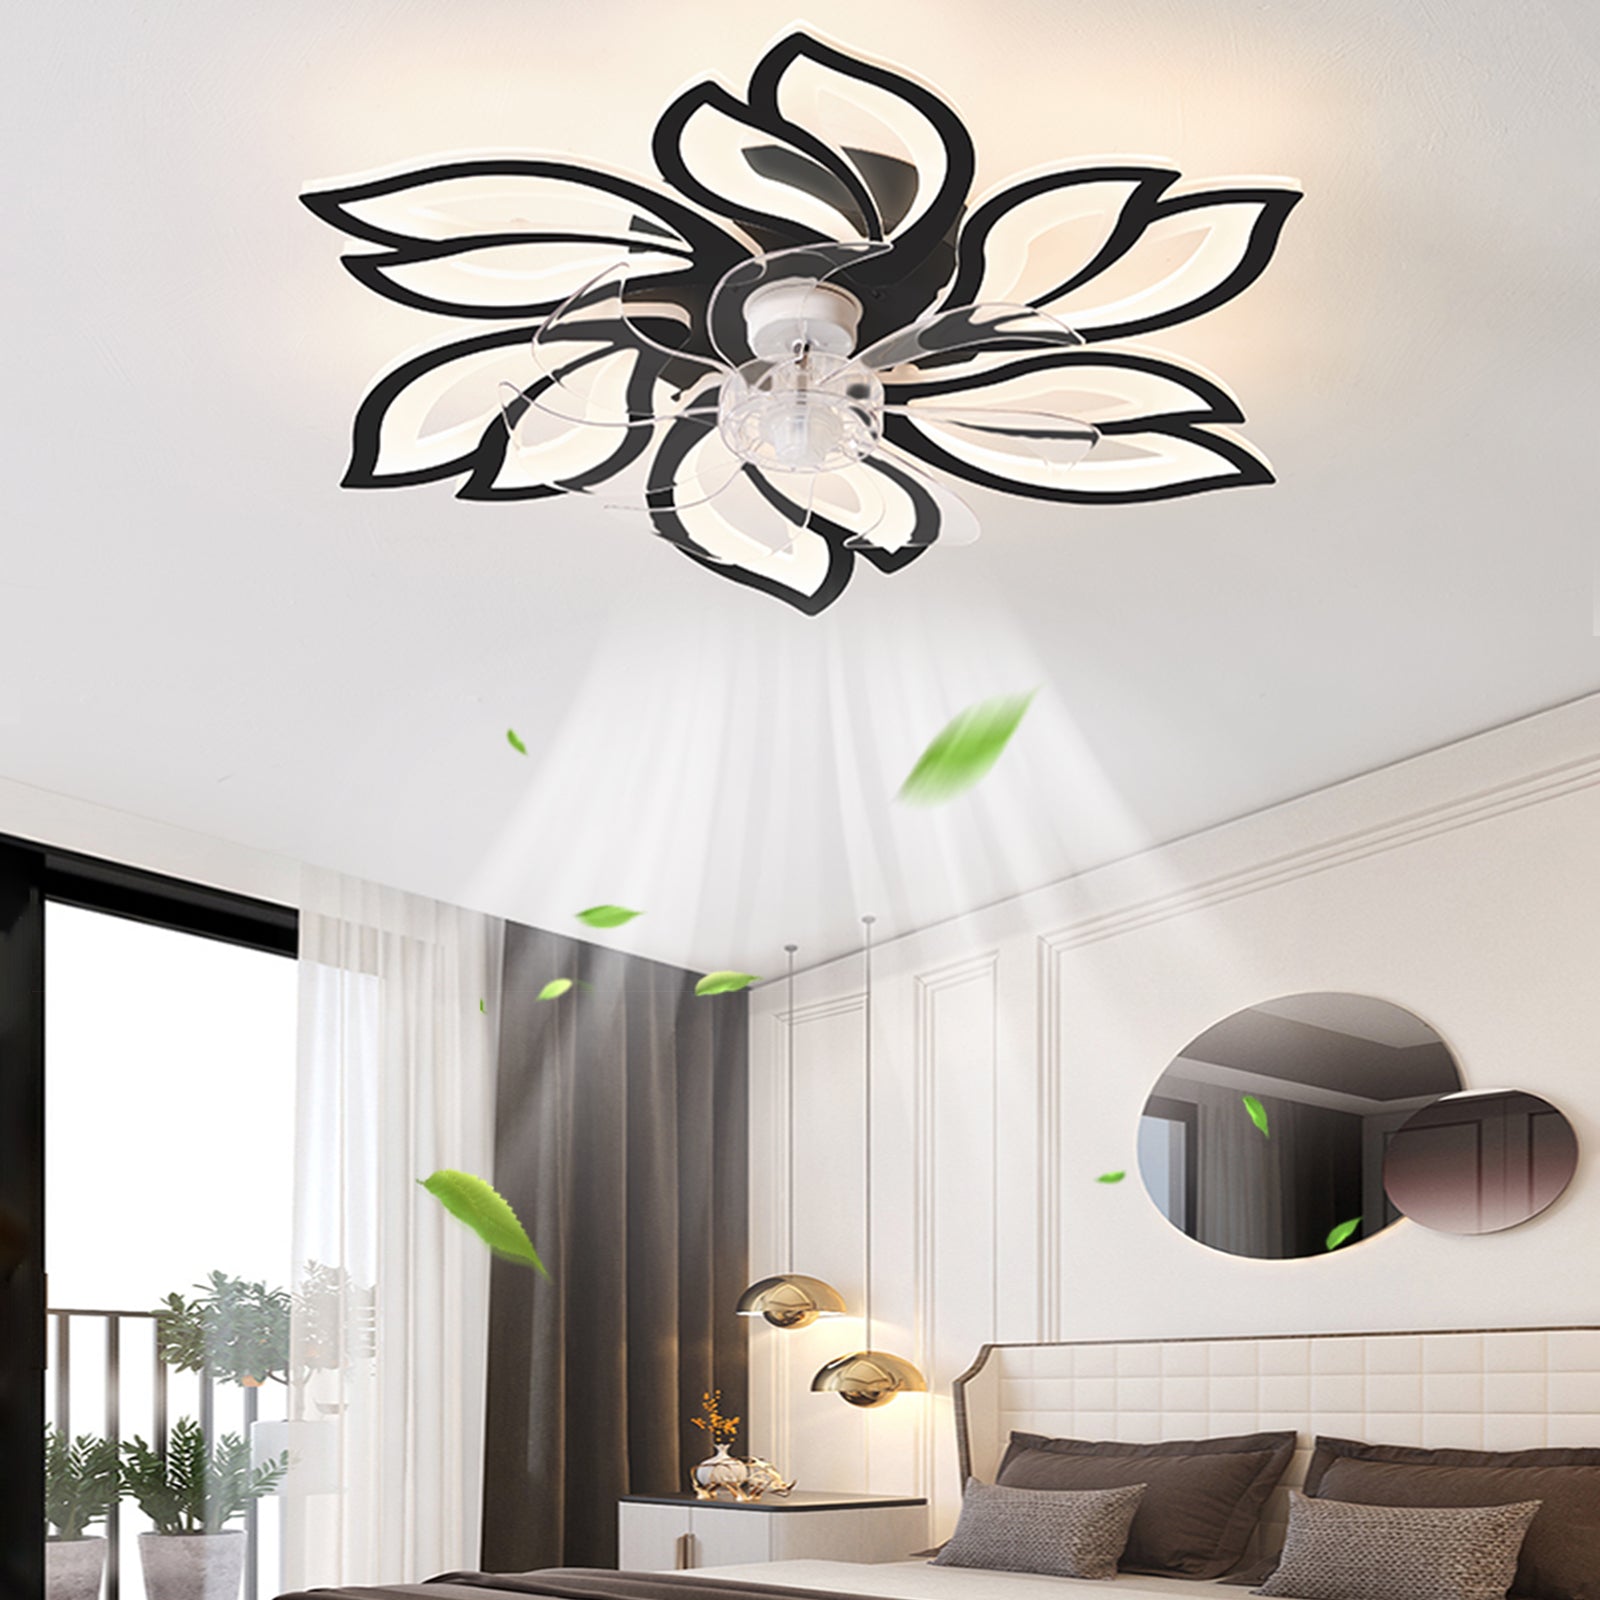 REYDELUZ 35" Modern Ceiling Fan with Lights and Remote & APP Control, Dimmable 6 Speed Reversible Blades, LED Flush Mount Low Profile Fan Light,Bladeless Ceiling Fan with Smart Timing